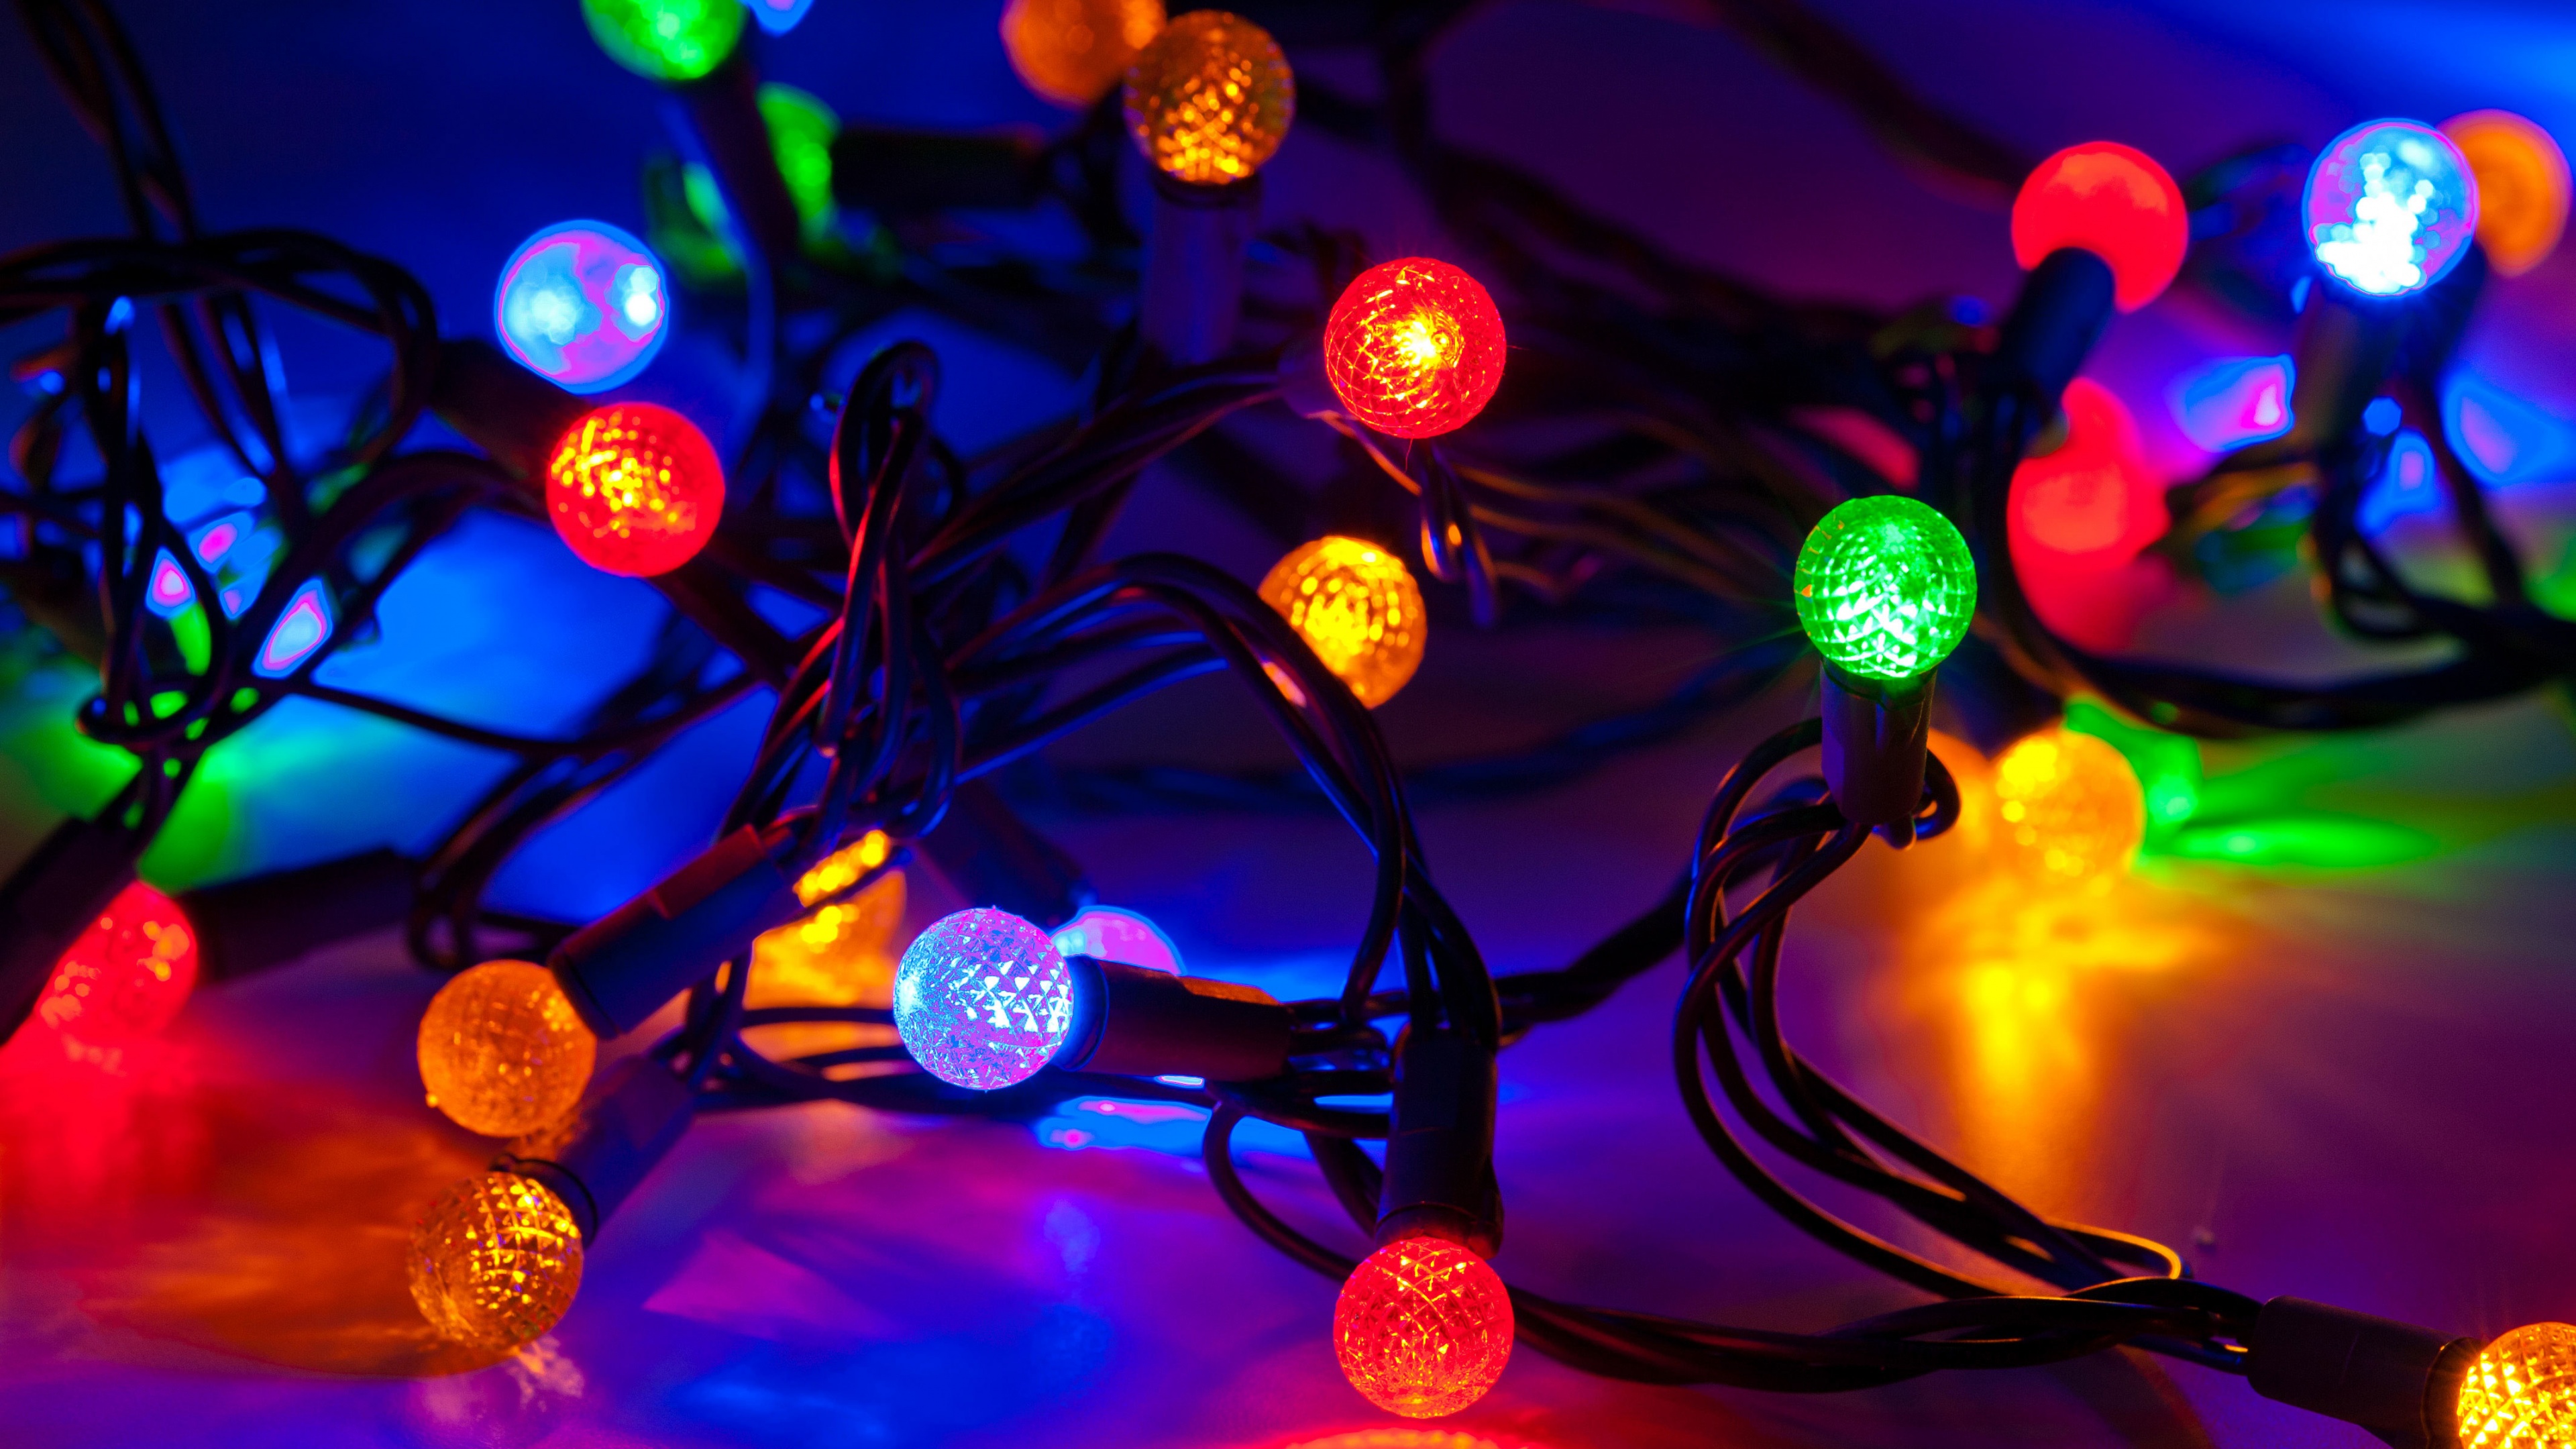 Party lights Wallpaper 4K, Christmas lights, Colorful